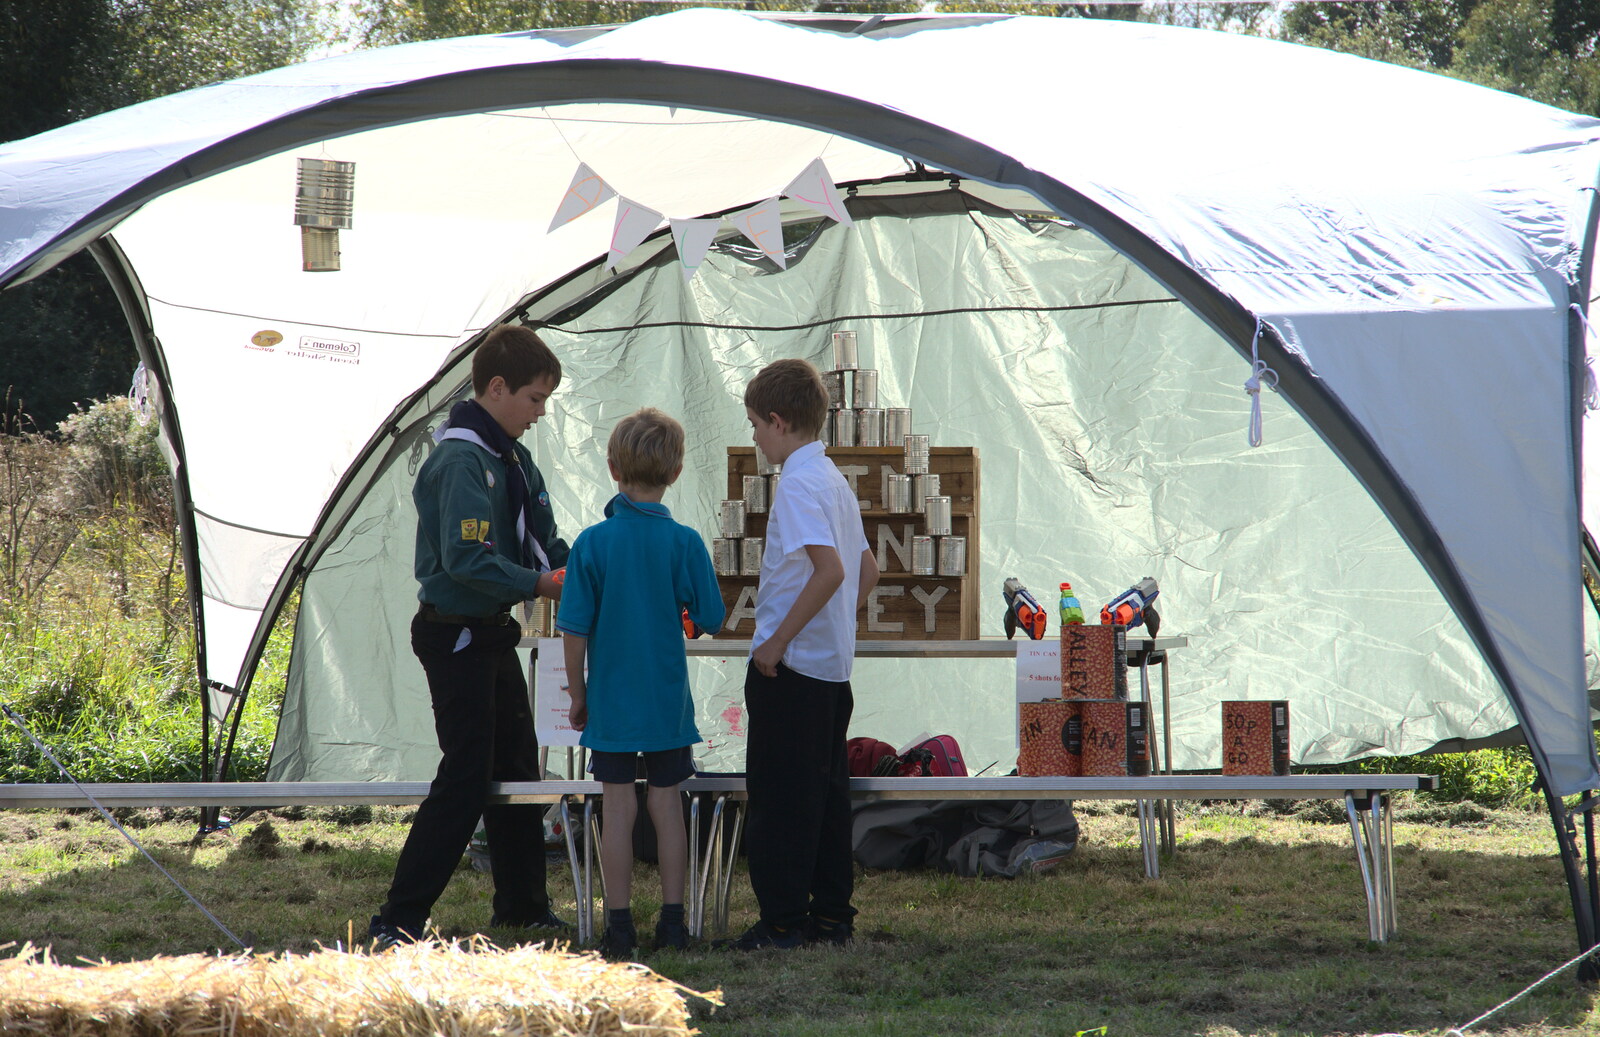 Gislingham Silver Band and the Duck Race, The Pennings, Eye, Suffolk - 29th September 2018: Harry and Fred in the Scout's tent